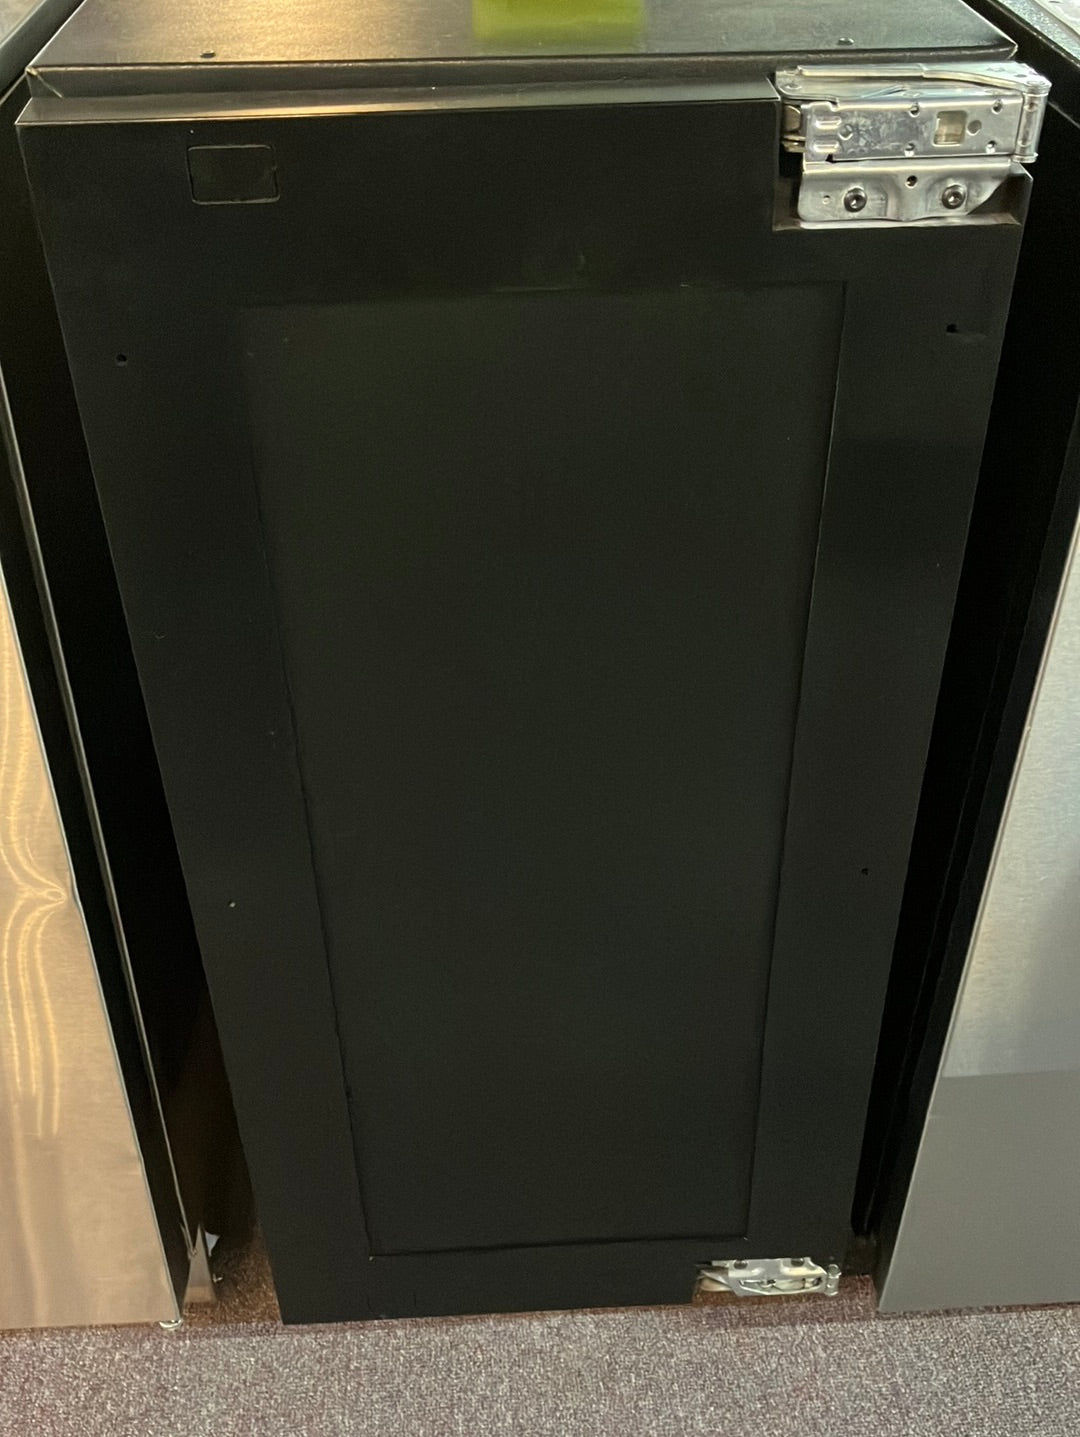 U-Line 1 Class UHNP315IS01A 15 Inch Nugget Ice Machine with LED Lighting Eco FriendlyDigital Controls, Interior Water Dispenser, Soft Close Door and Black Interior: Panel Ready, Factory Installed Pump, Right Hinge